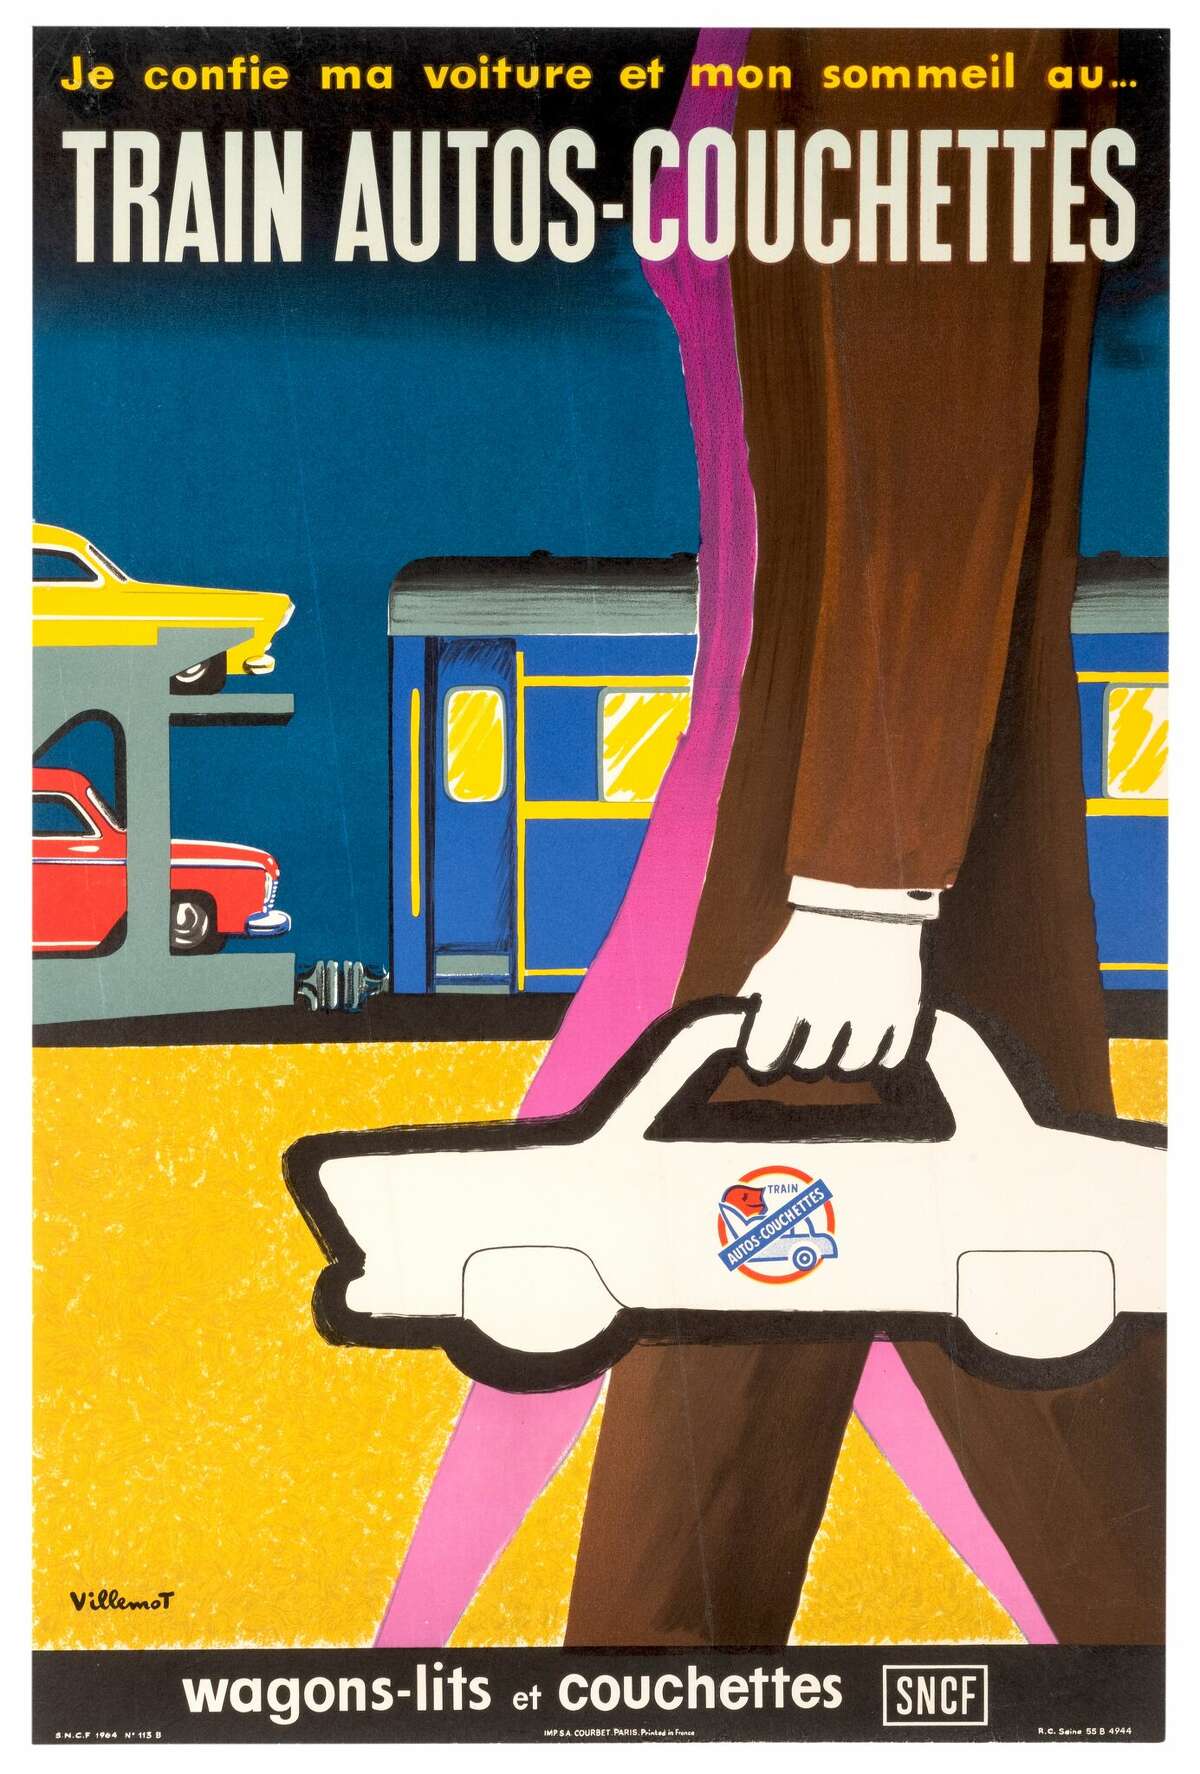 "Train Autos-Couchettes" travel poster advertising sleeping cars and depicting a couple carrying a car-shaped bag near an auto train, illustrated by Bernard Villemot for the French National Railway Company in 1964.